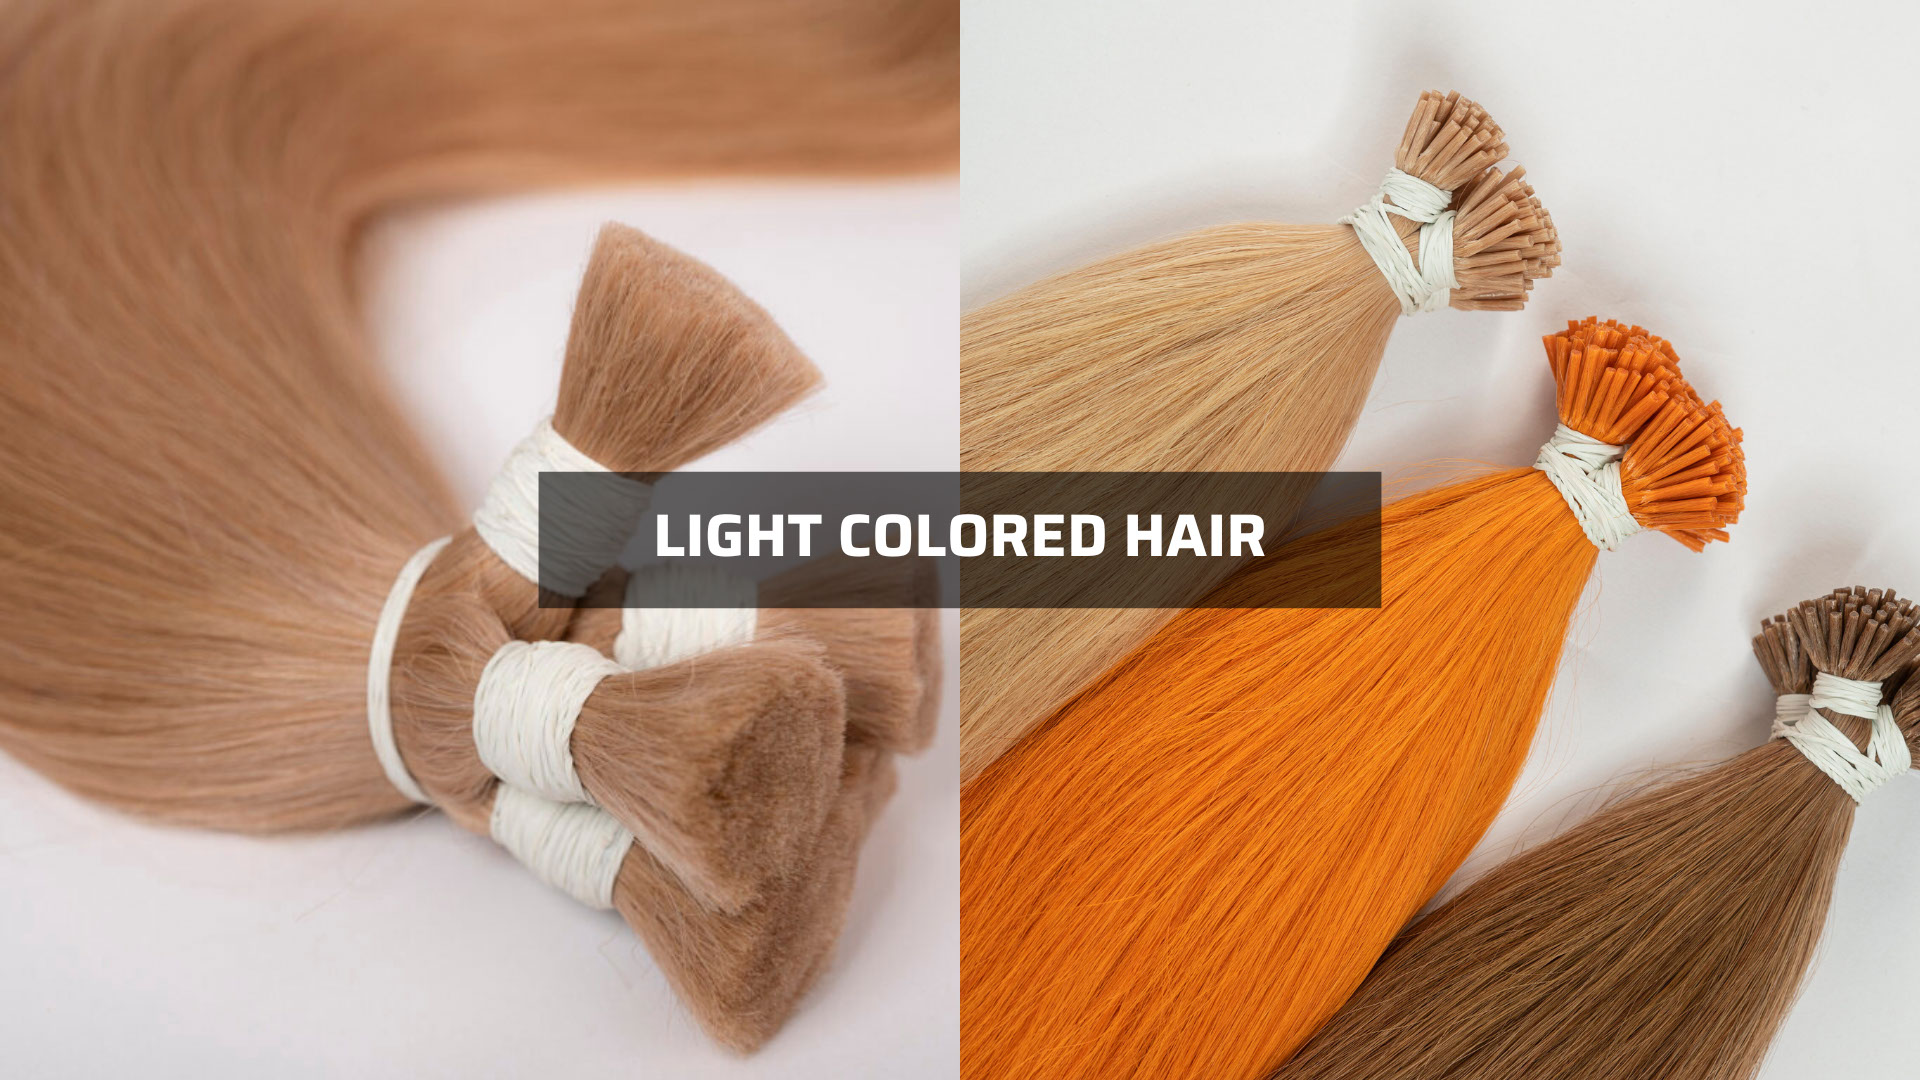 Blond hair from wholesale hair vendors